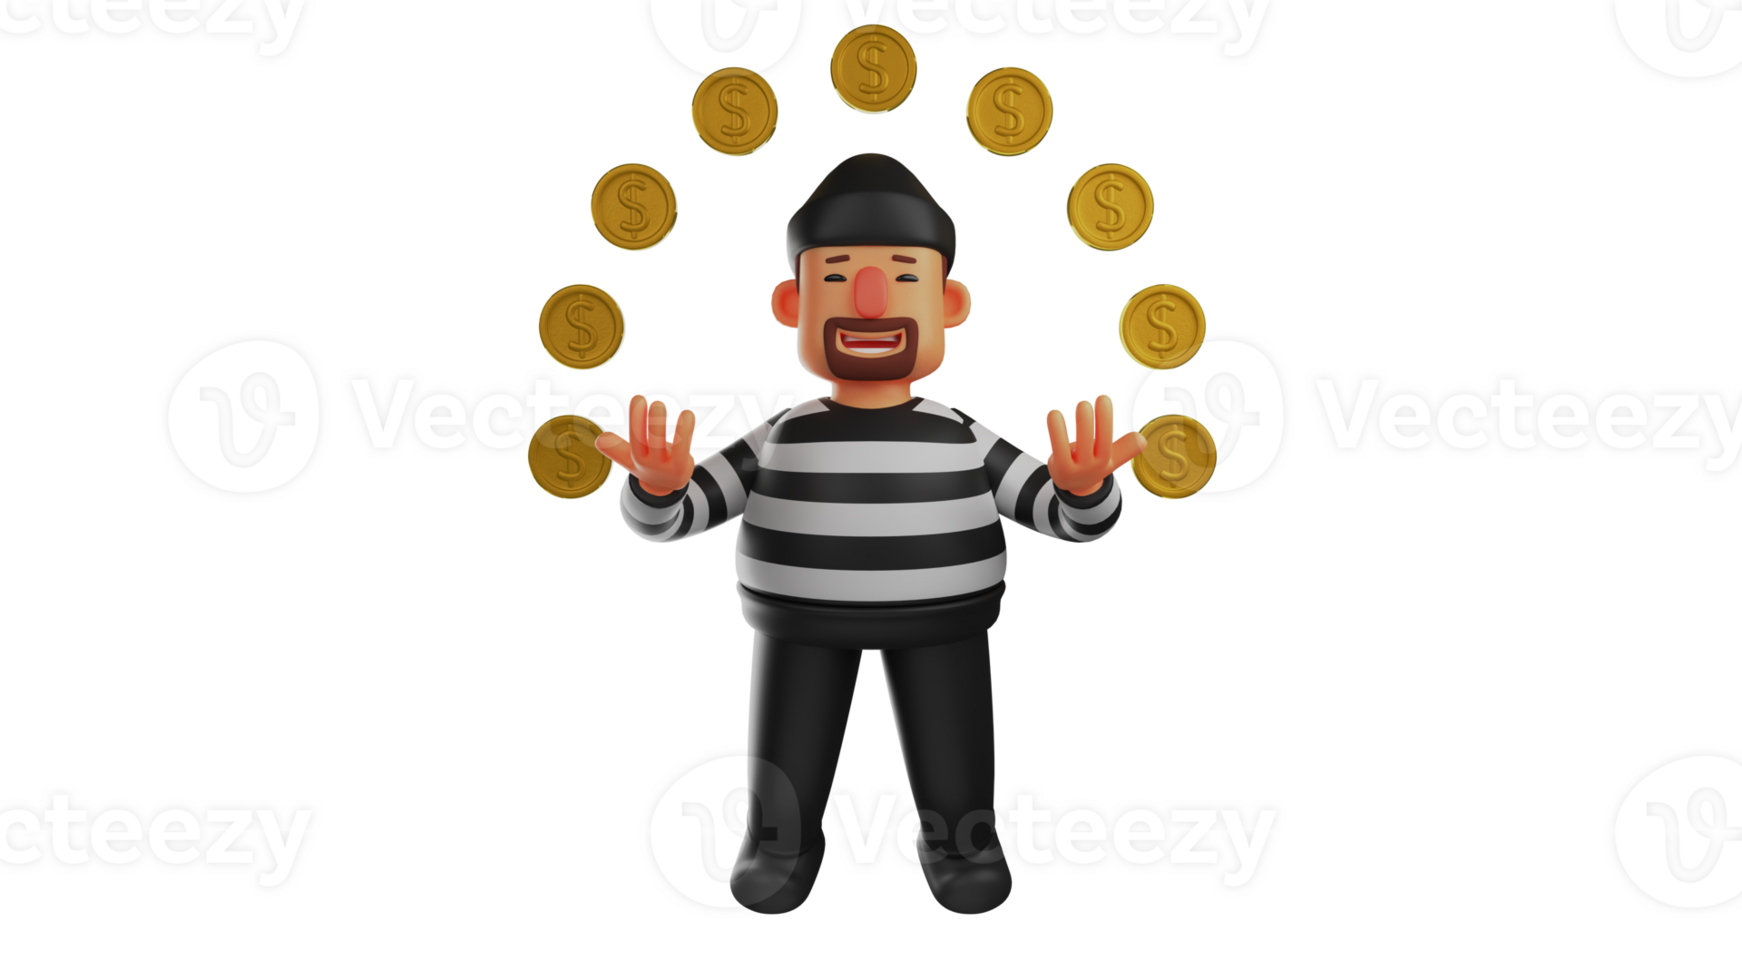 3D illustration. Thief 3D Cartoon Character. The thief raised both hands. Thief surrounded by gold coins. The thief smiled. Thief in black and white clothes. Hardened criminal. 3D cartoon character png